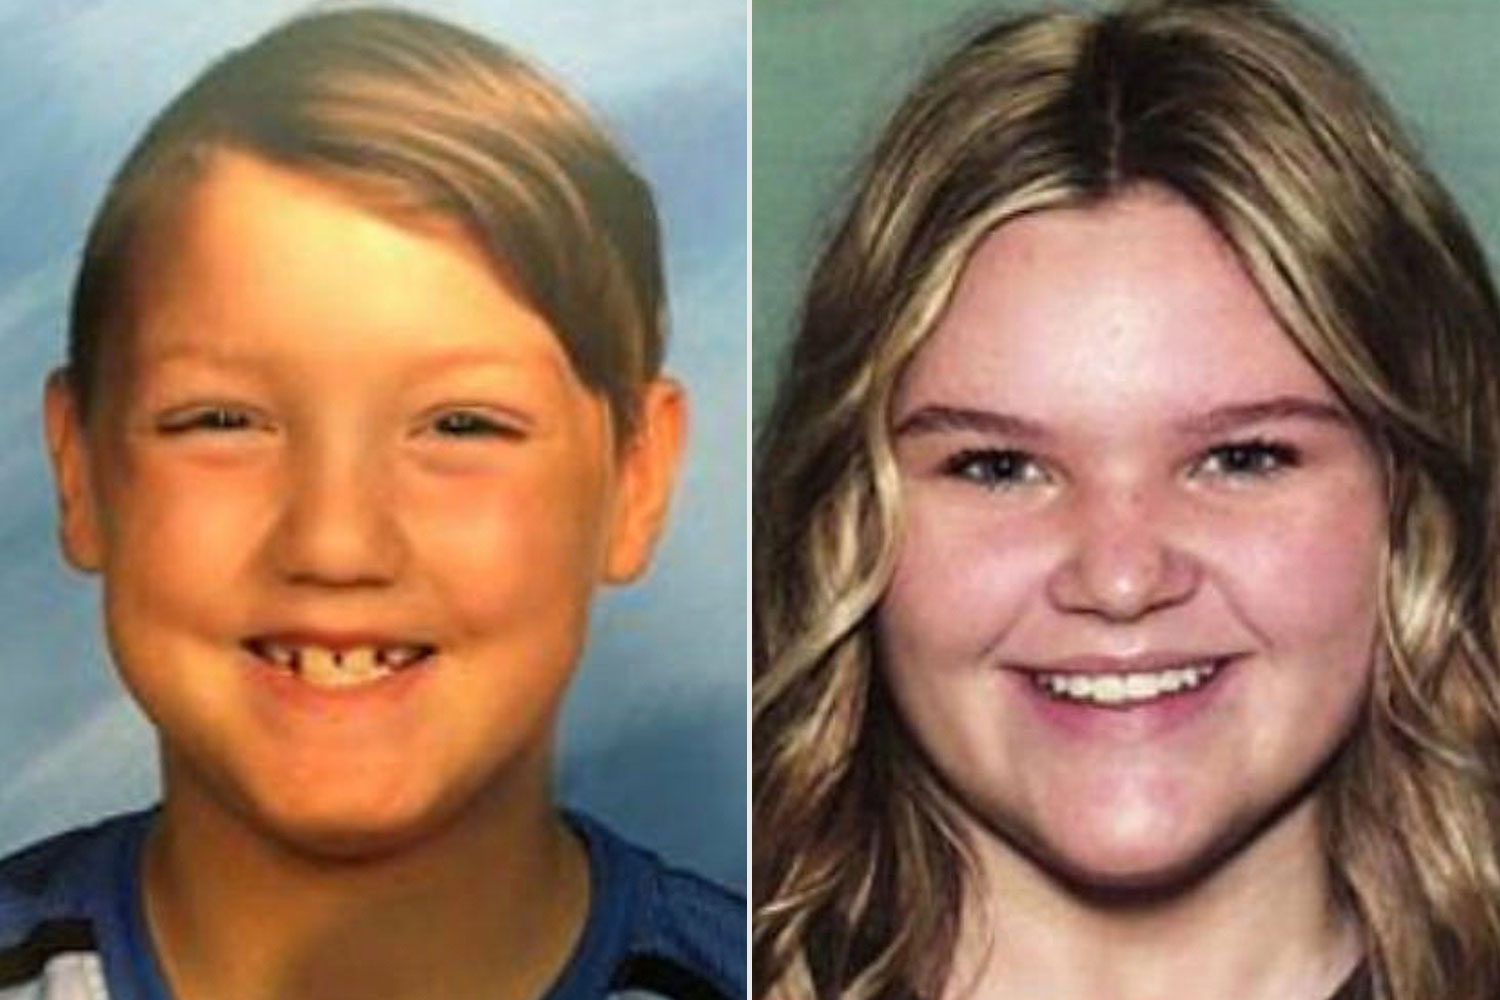 Mom of 2 Missing Kids Believes She's God, Won't Help Police